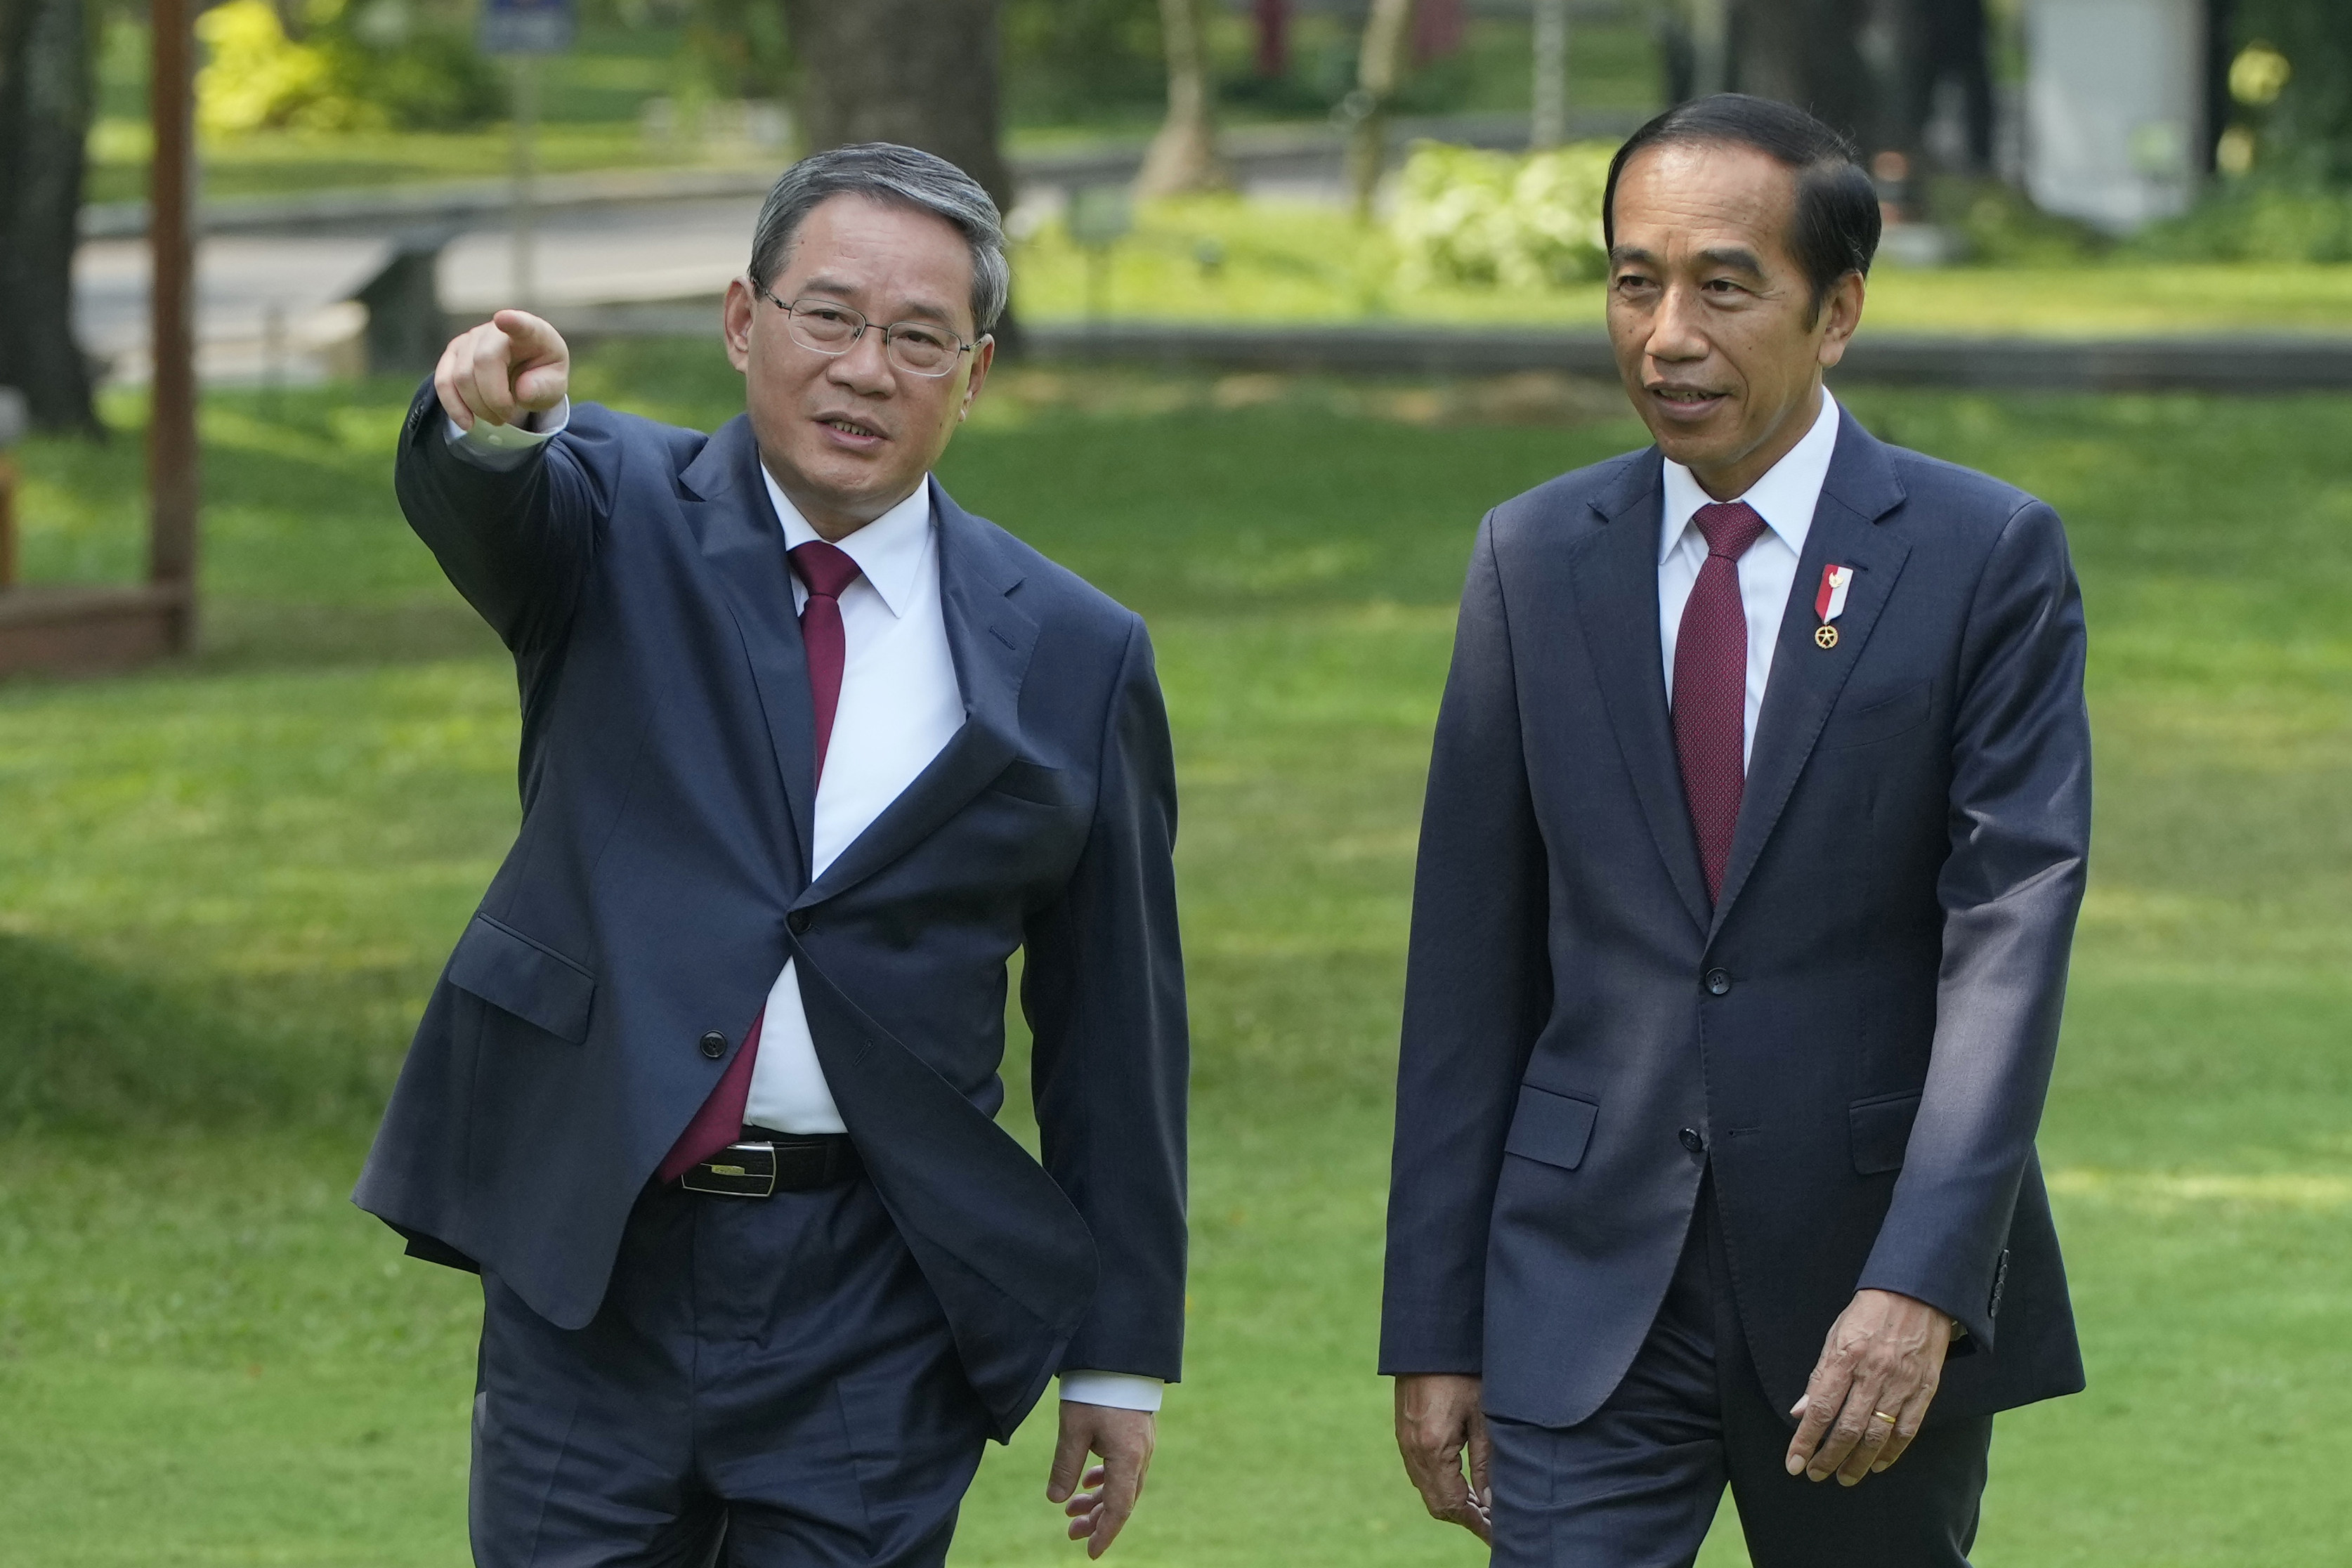 Chinese Premier Li Qiang with Indonesian President Joko Widodo on  the lawns of Merdeka Palace in  Jakarta on Friday. Photo: AP